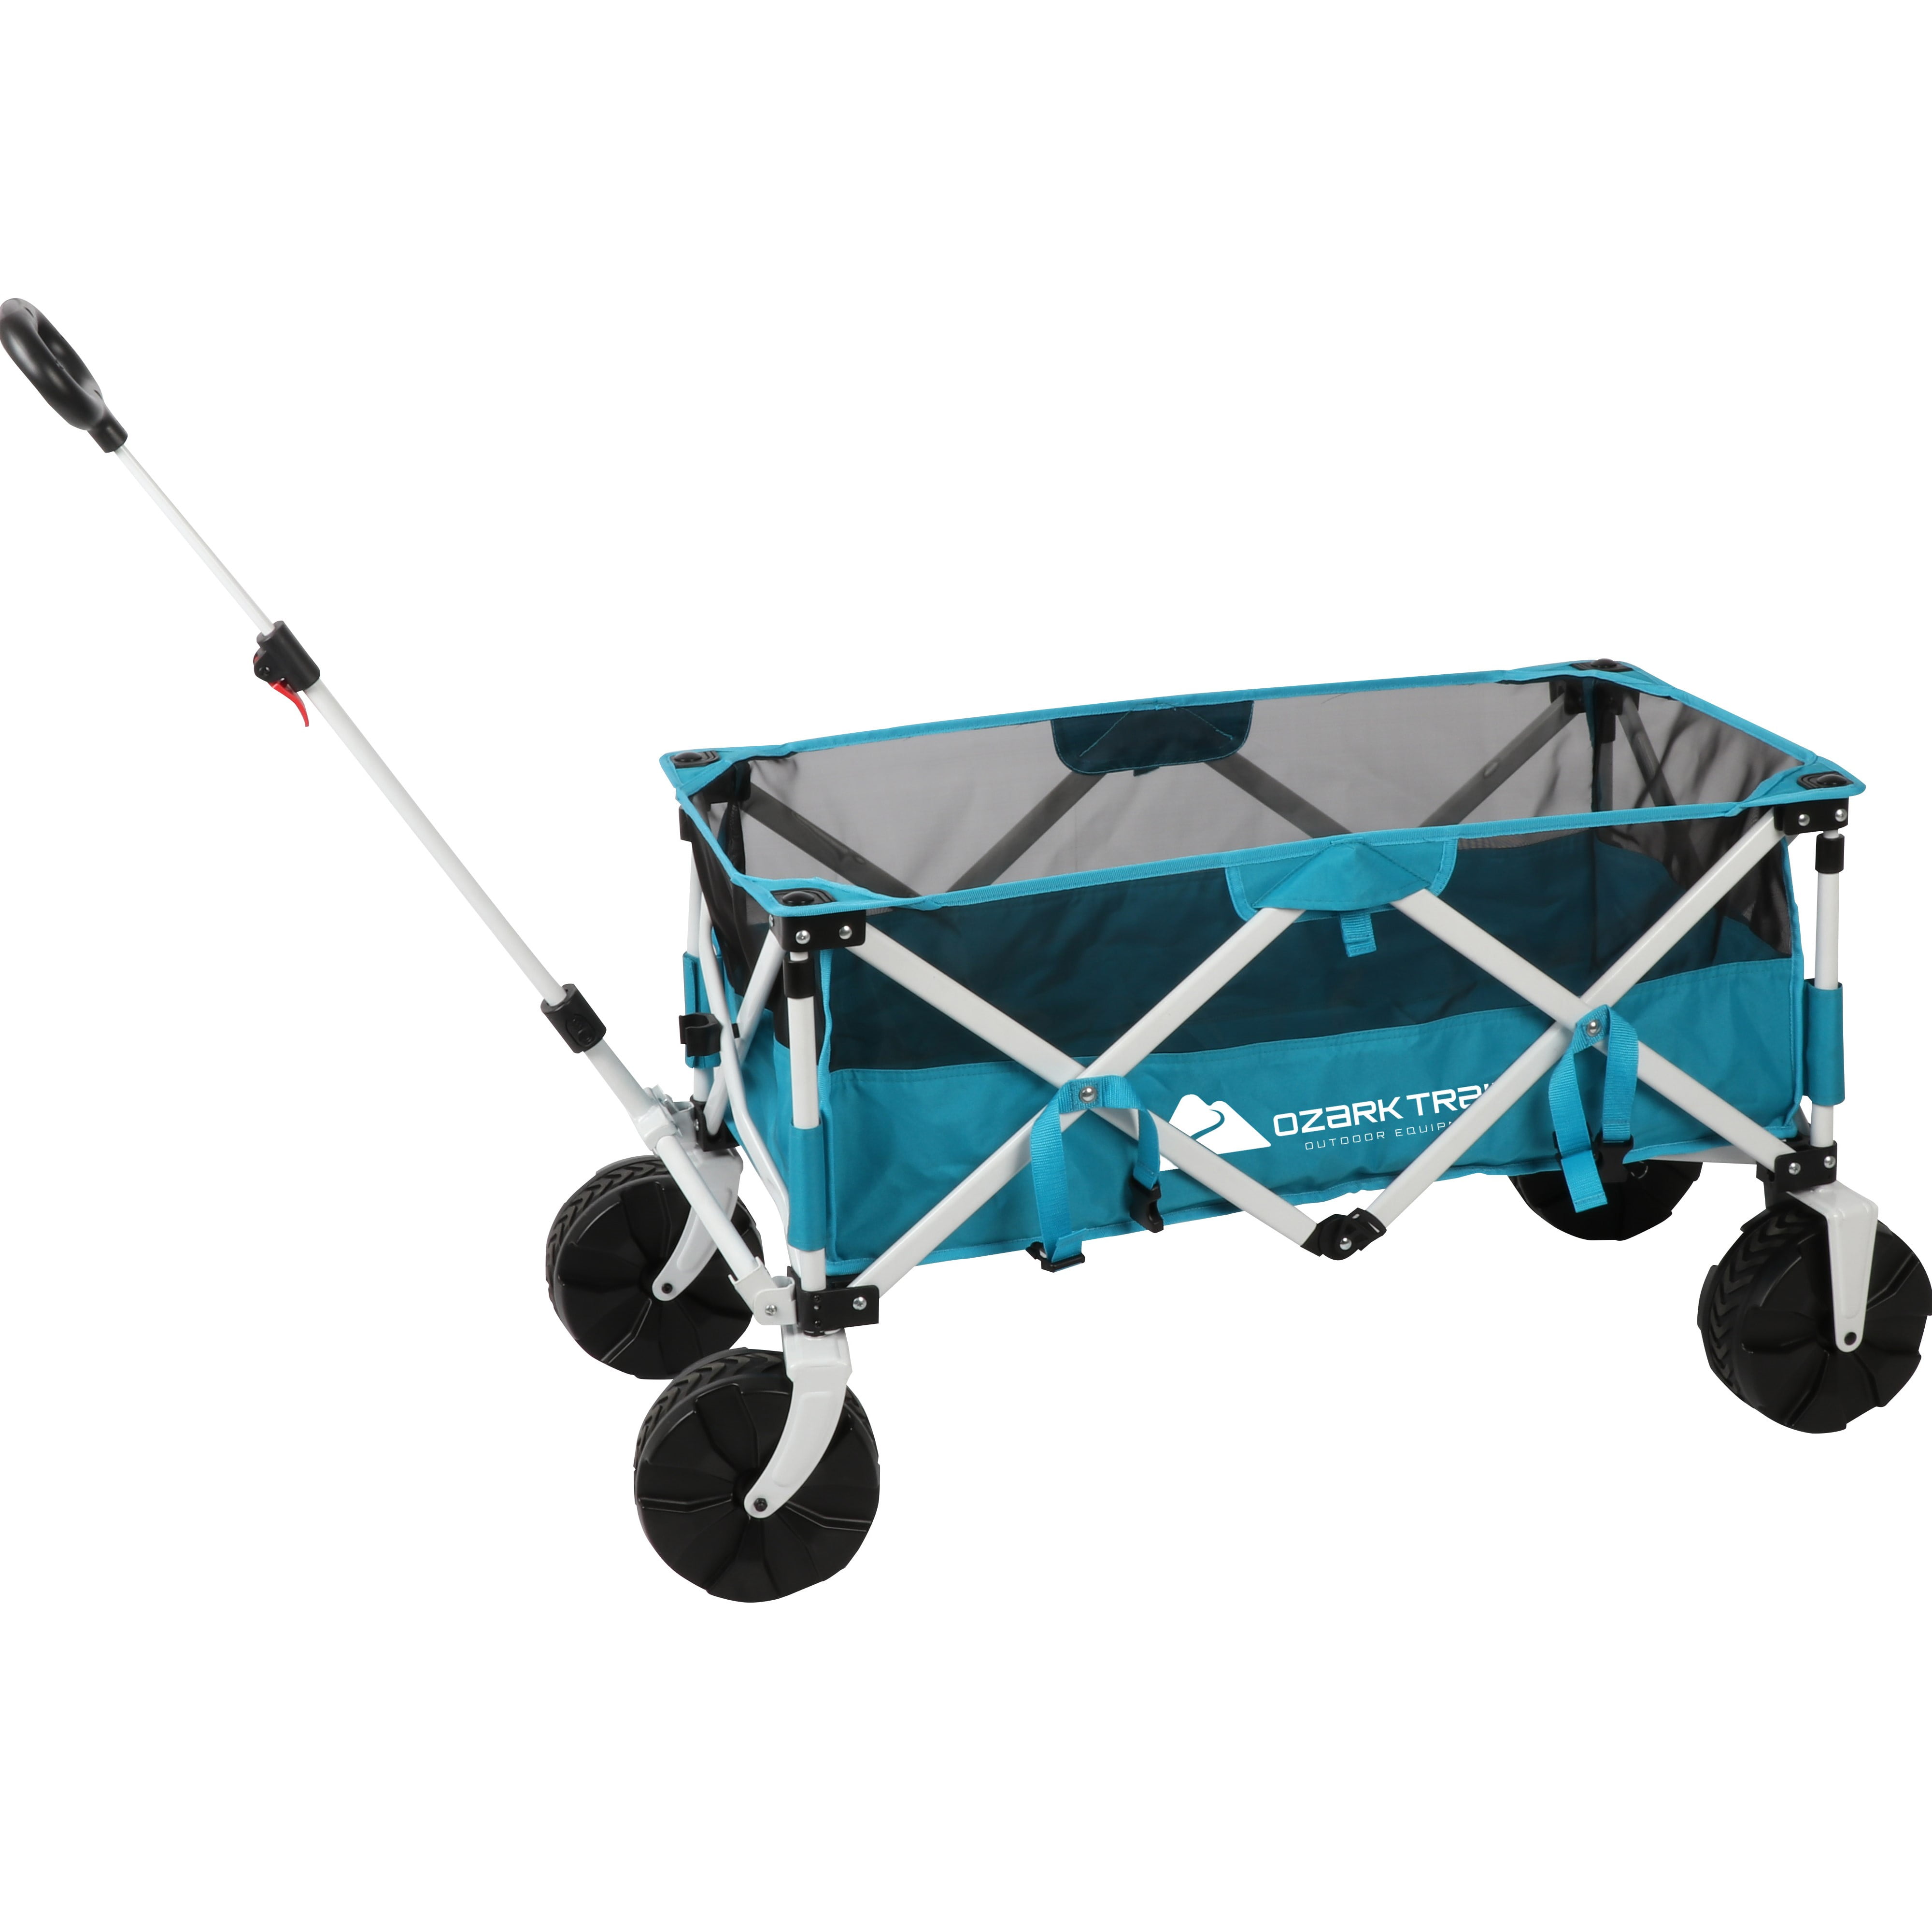 Ozark Trail Sand Island Beach Wagon Cart, Outdoor and Camping, Blue, Adult - 1